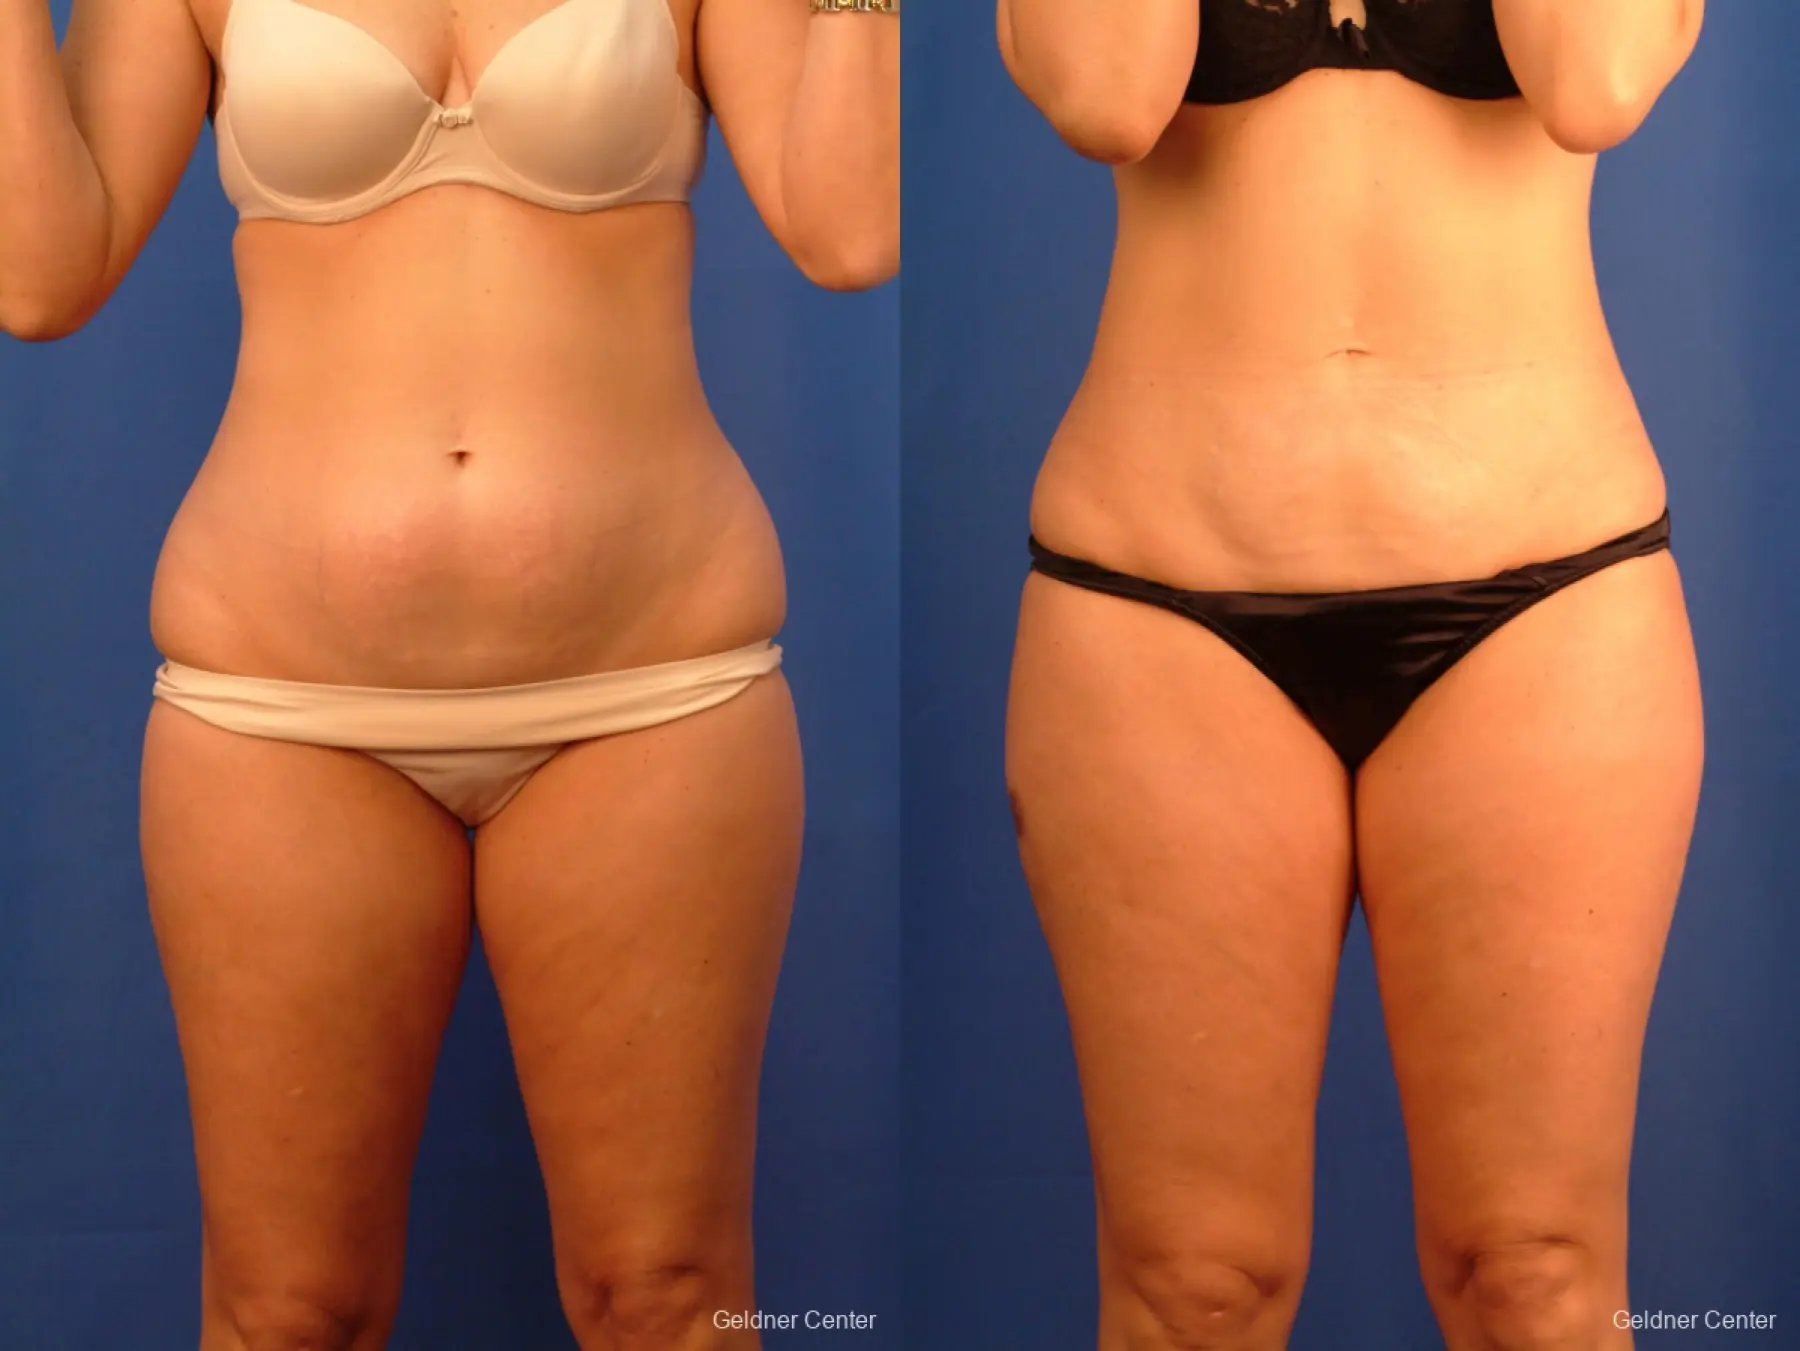 Vaser lipo patient 2520 before and after photos - Before and After 1